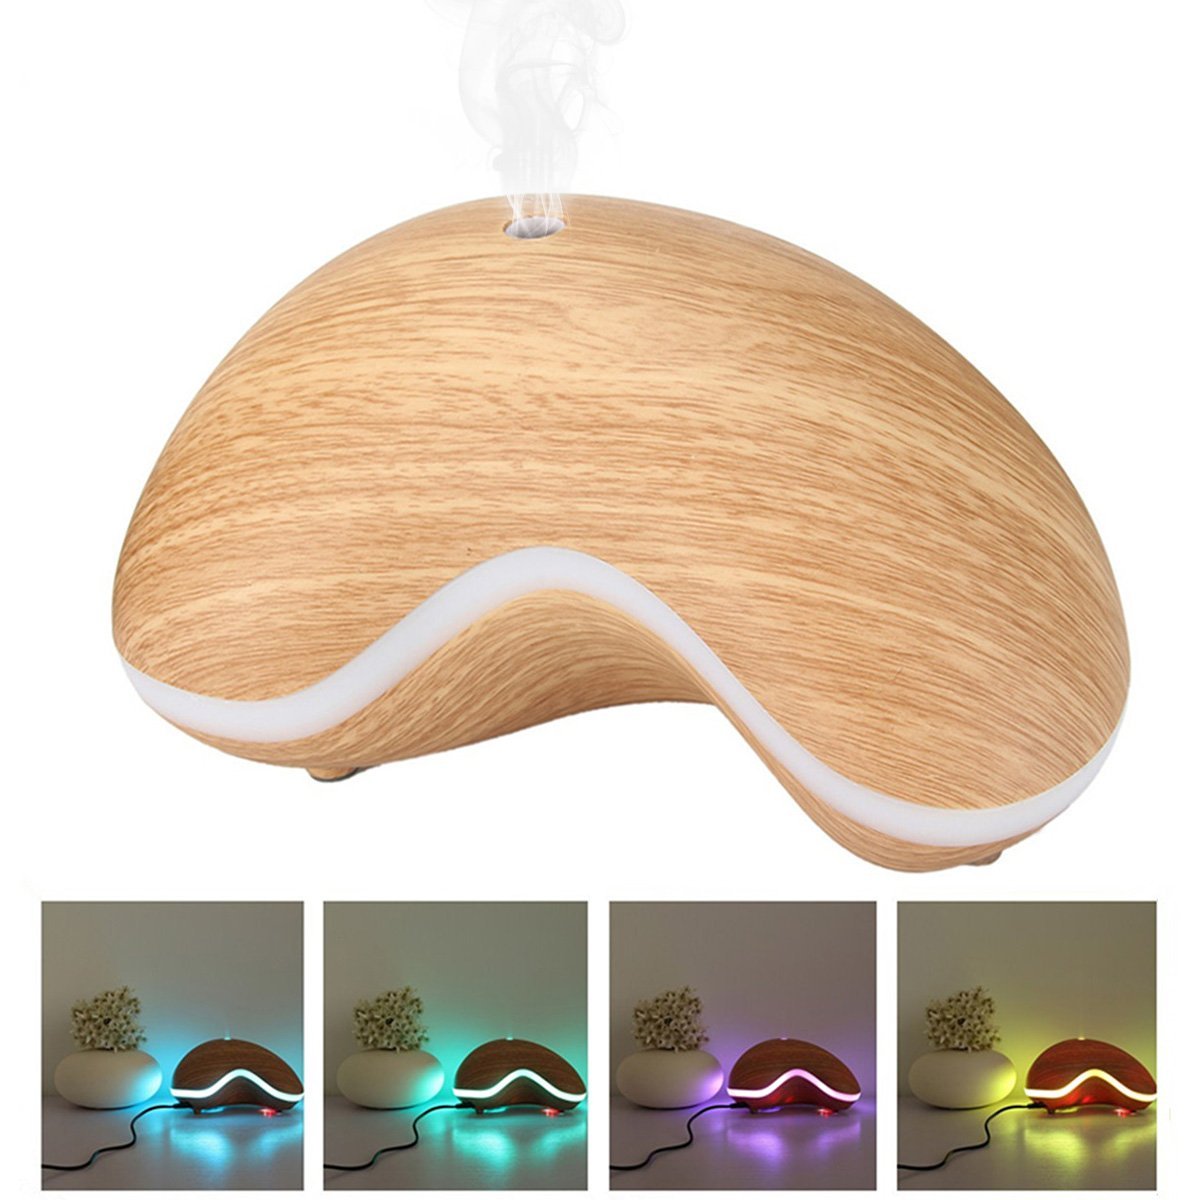 

6 Color Changing LED Light 150ML Aroma Diffuser Aromatherapy Light Colored Wood Grain Essential Oil Diffuser Ultrasonic Air Humidifier